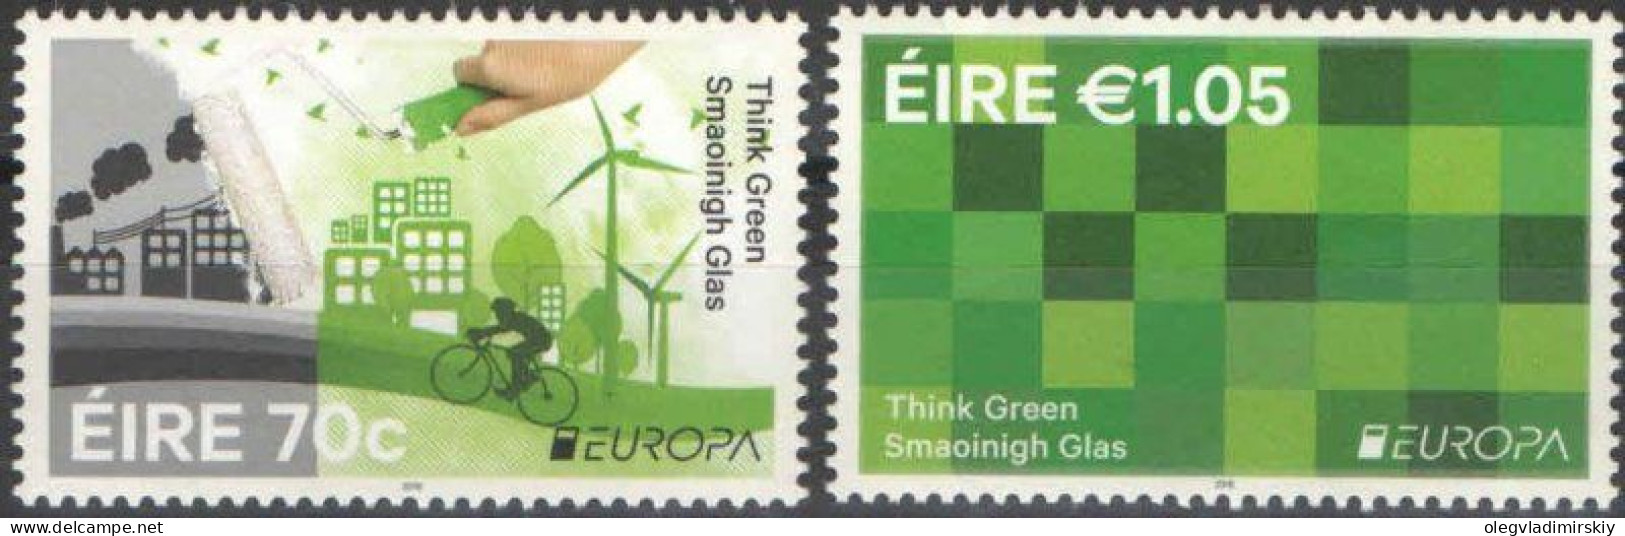 Ireland Irland Irlande 2016 Europa CEPT Think Green Set Of 2 Stamps MNH - Unused Stamps